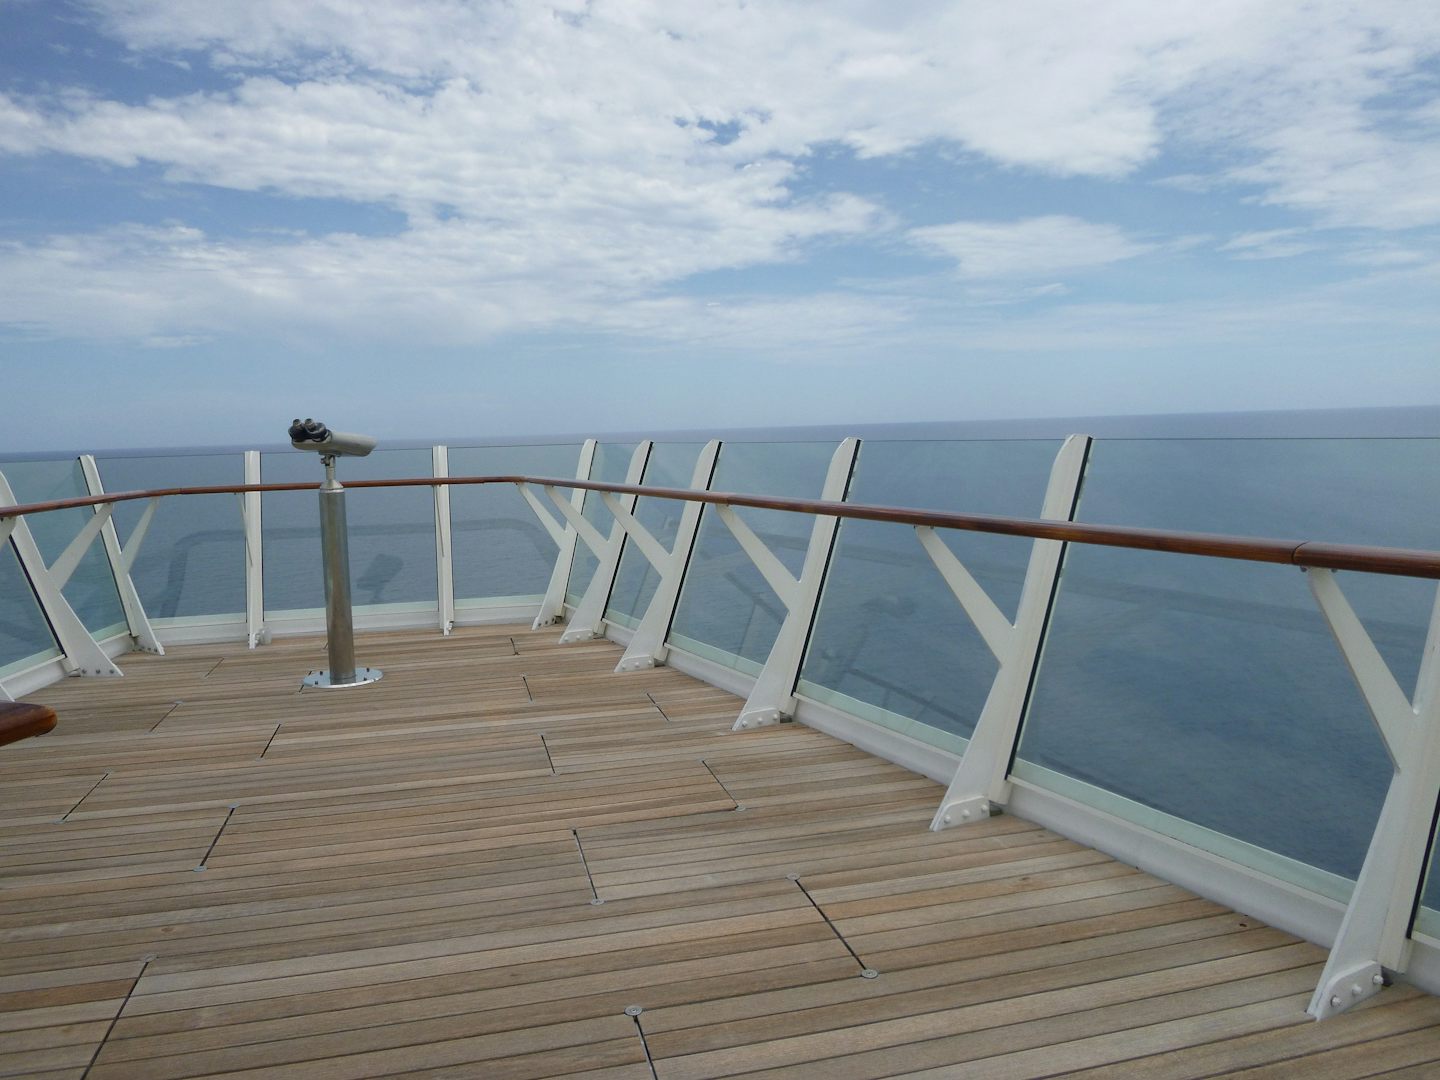 The sundeck, which you can access from port side, floor 14. It is a large and quiet spot with excellent views. This is just one of the viewing areas on the deck.